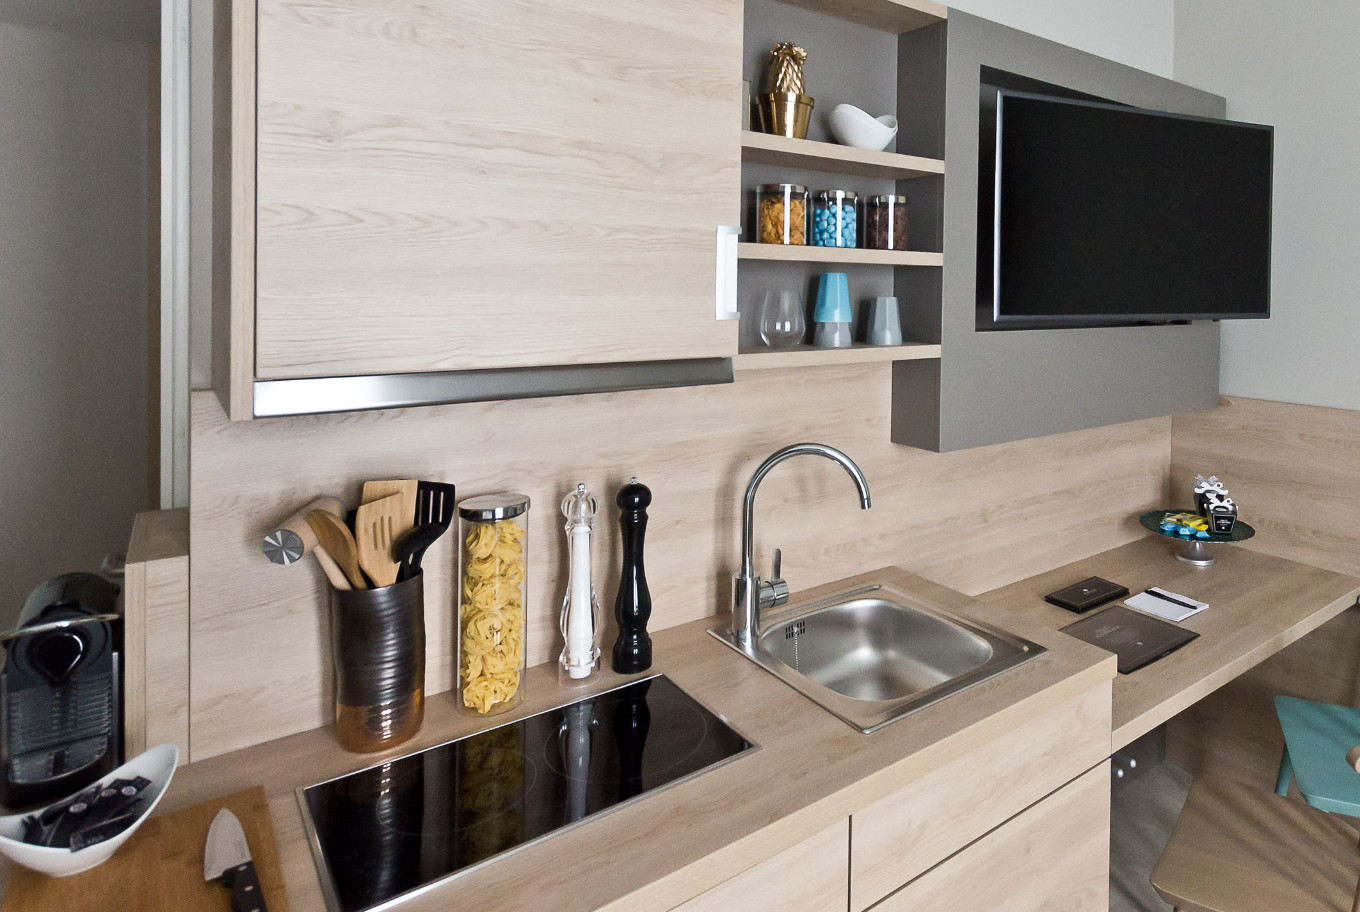 In our Arthotel ANA Living you are also offered a fully equipped kitchen.